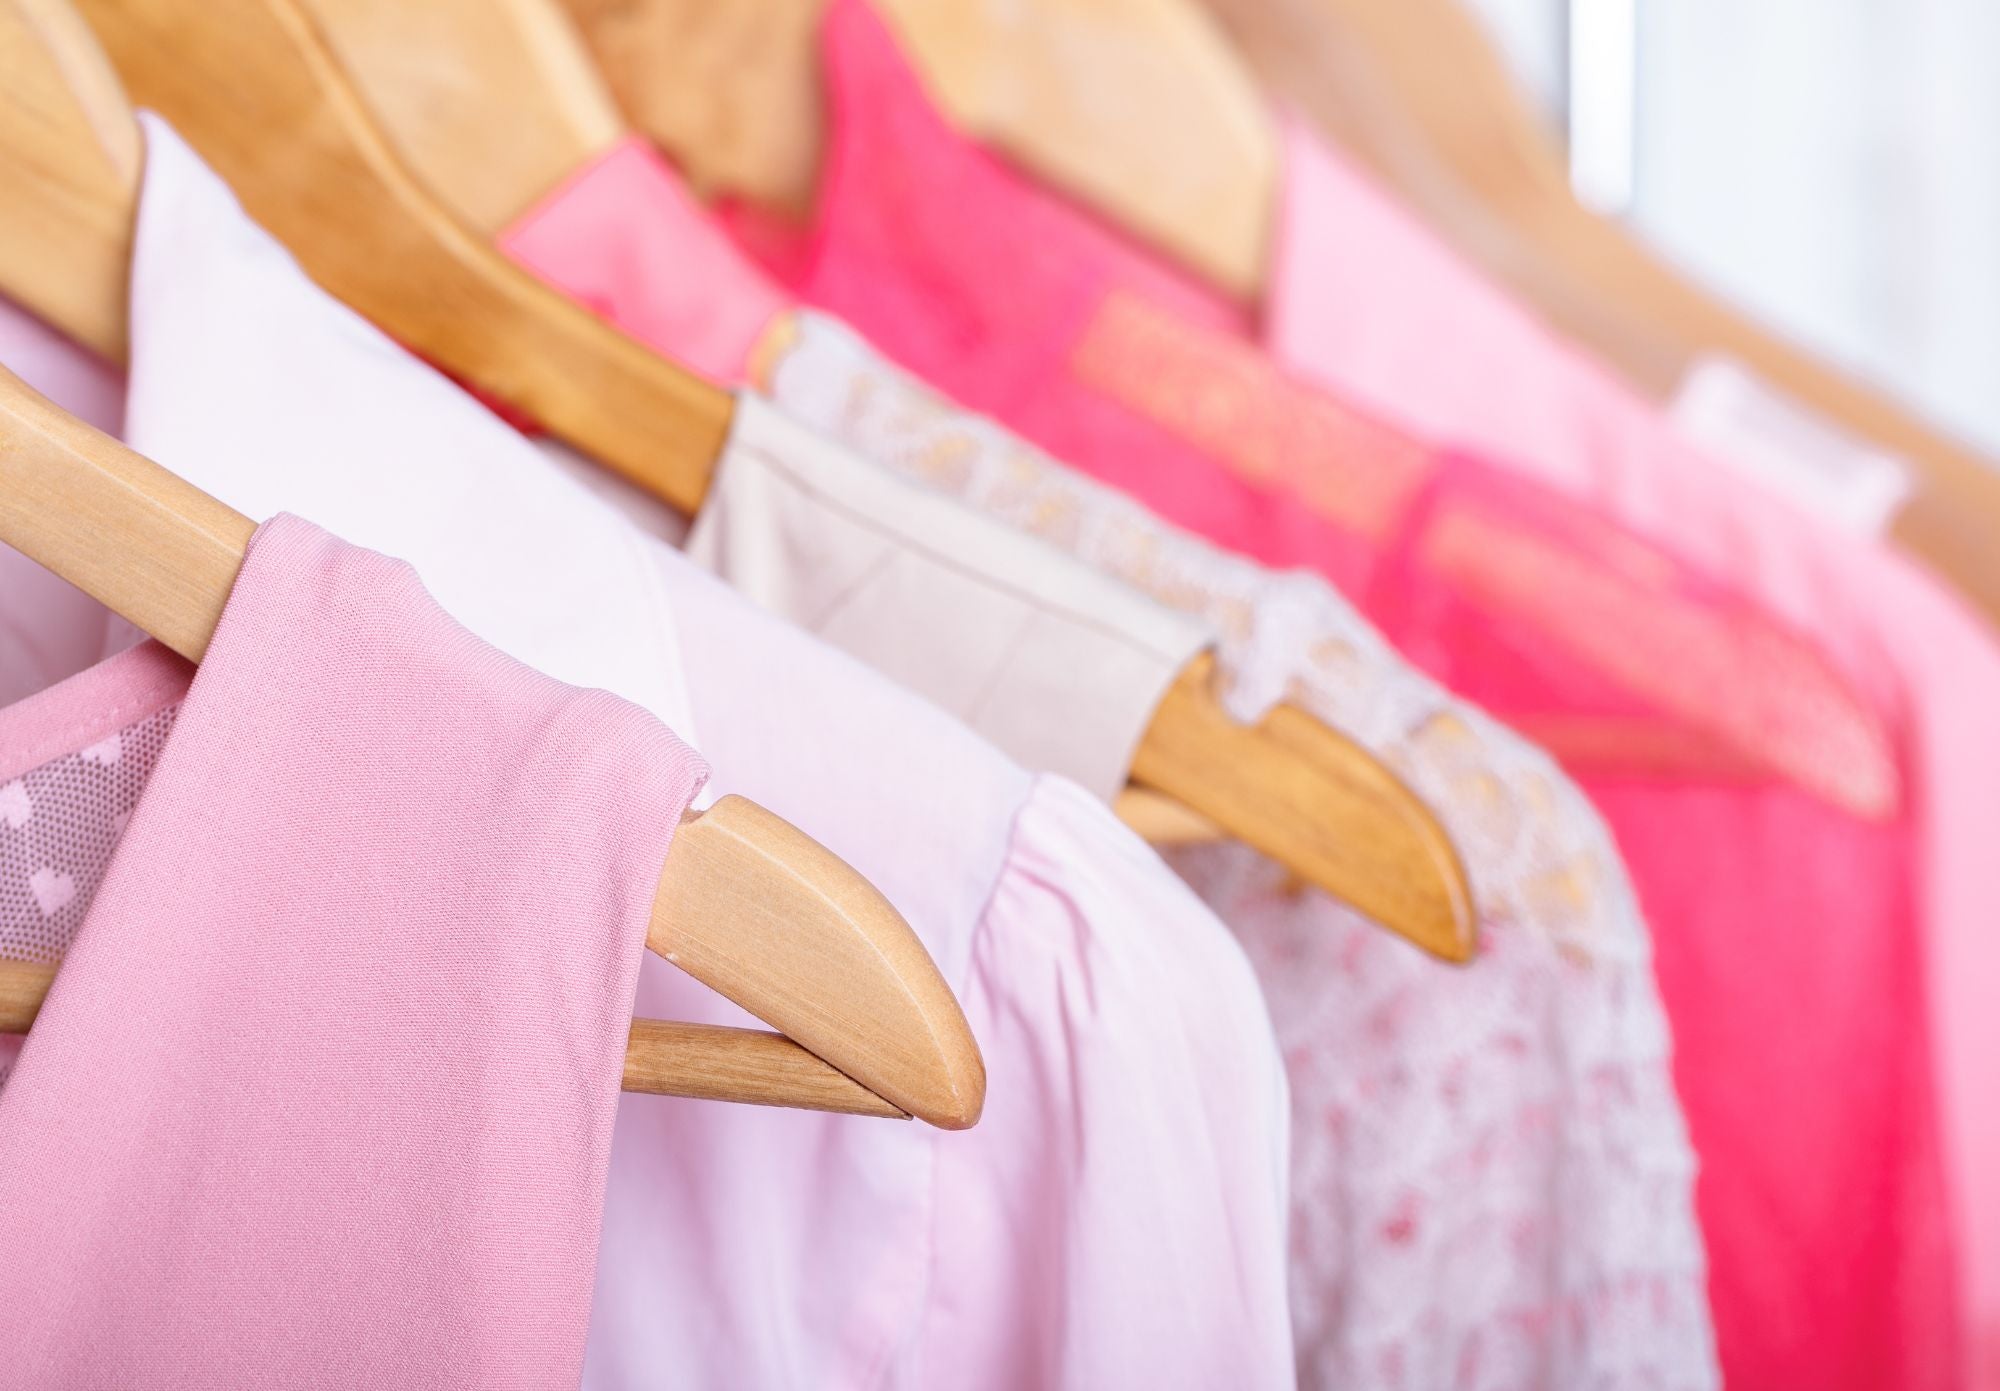 Spring Clean Your Closet in 4 Easy Steps